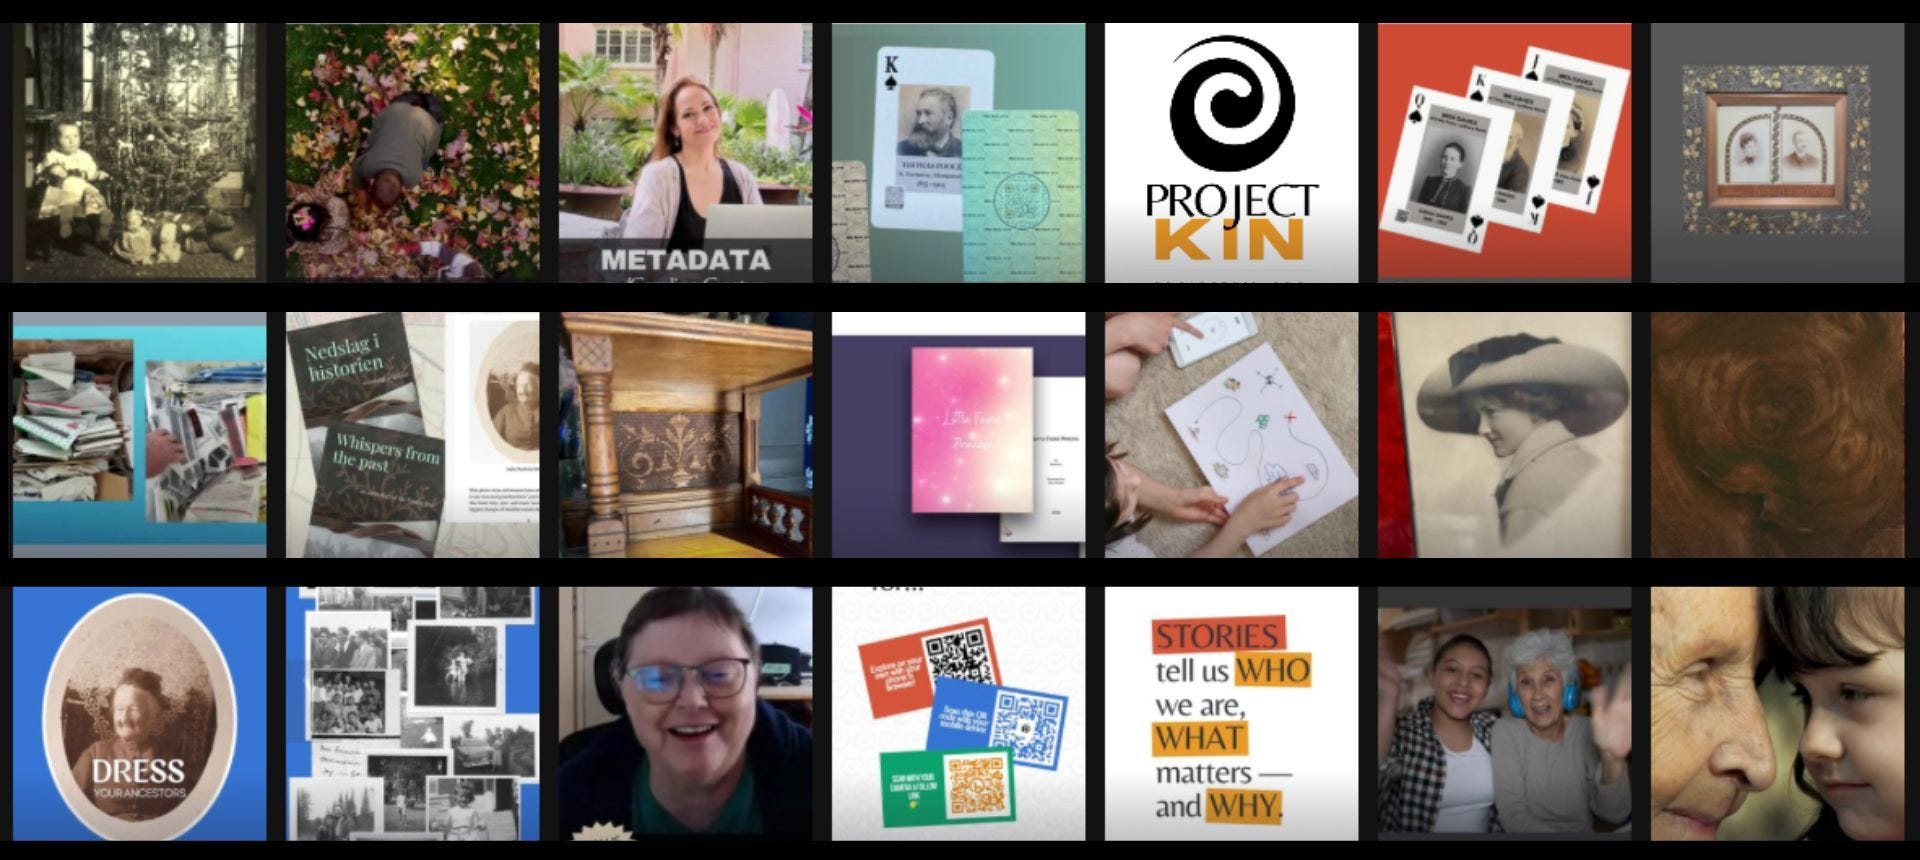 Thumbnails from a variety of Projectkin.org social media posts